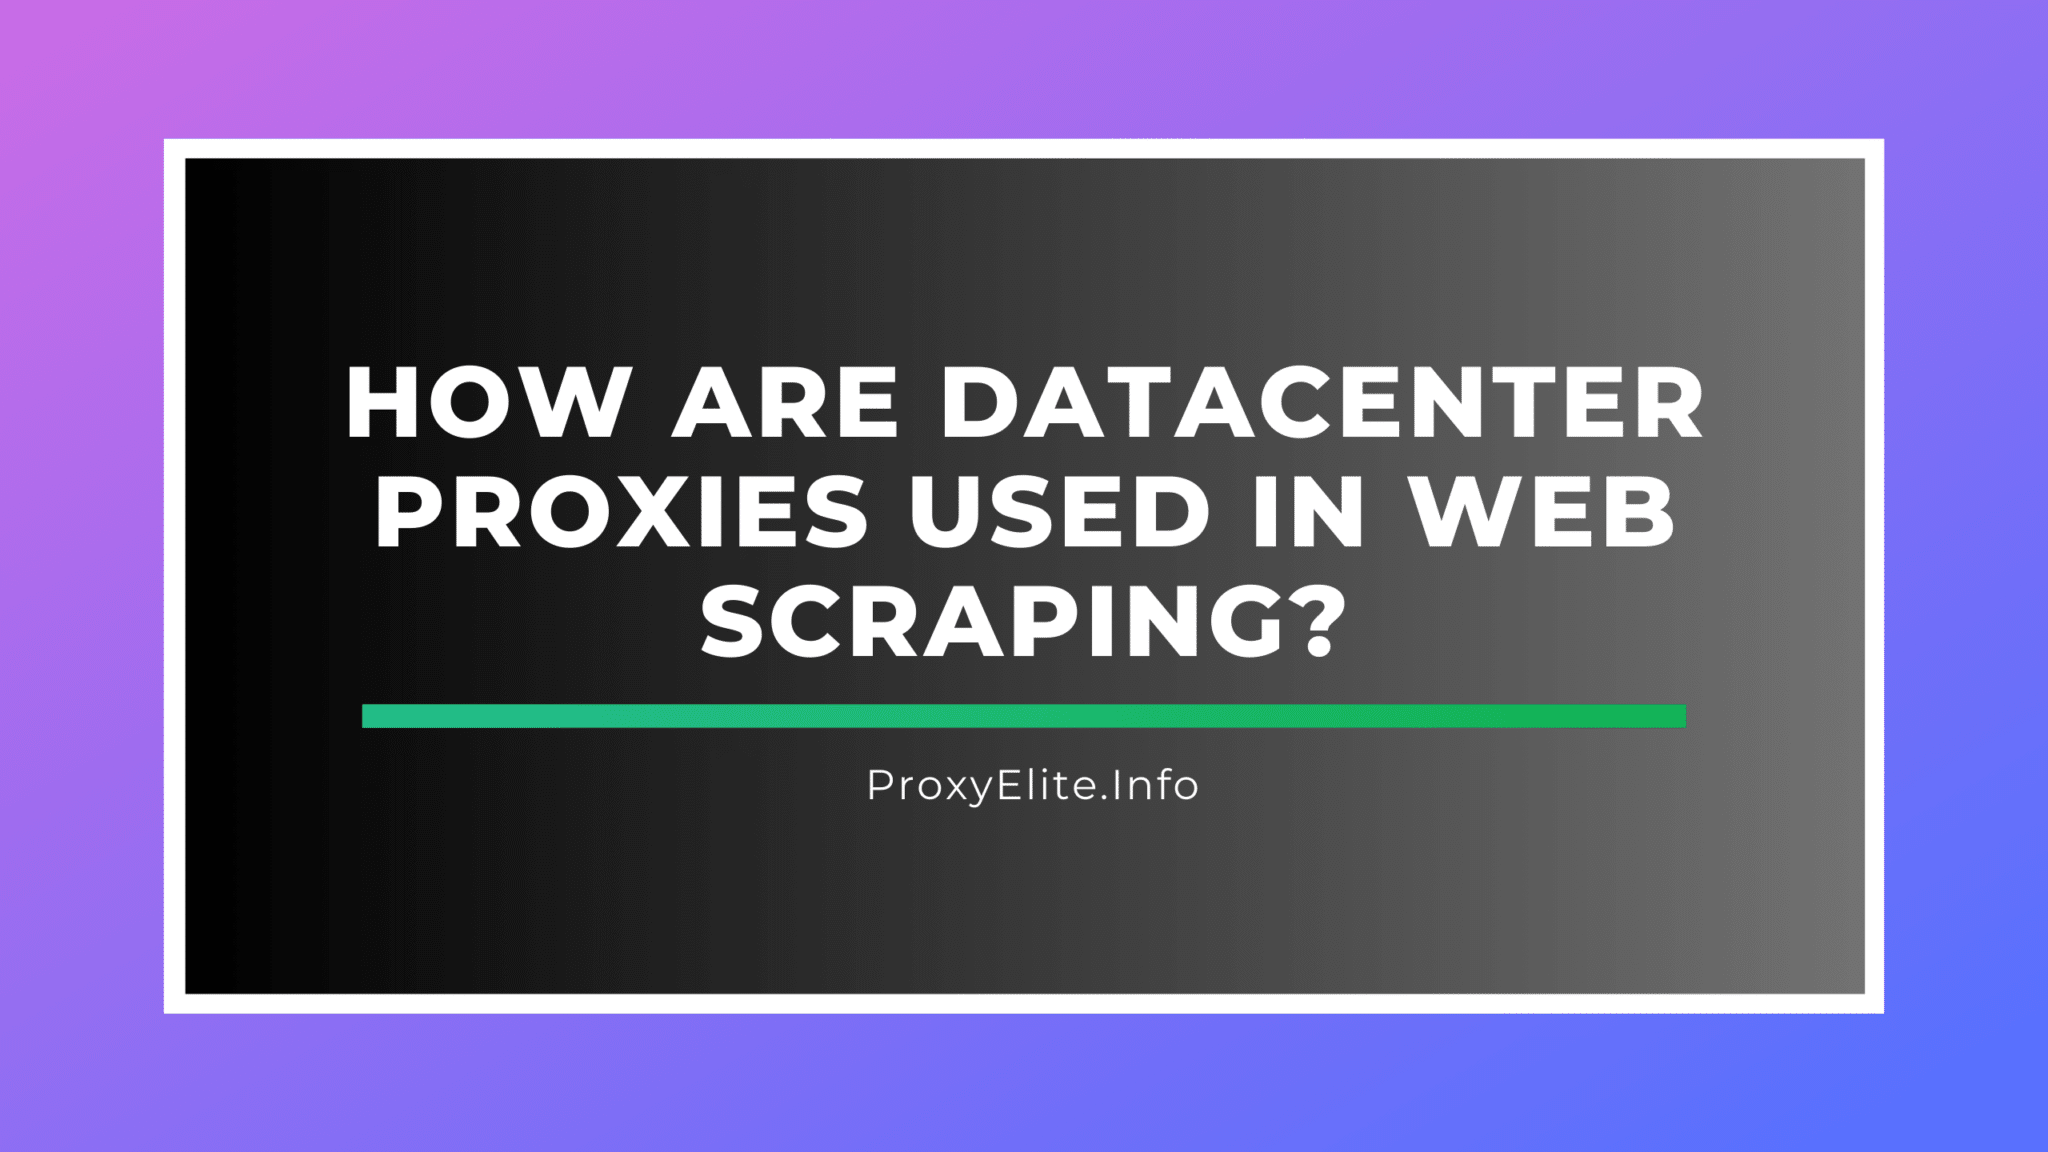 How are datacenter proxies used in web scraping?